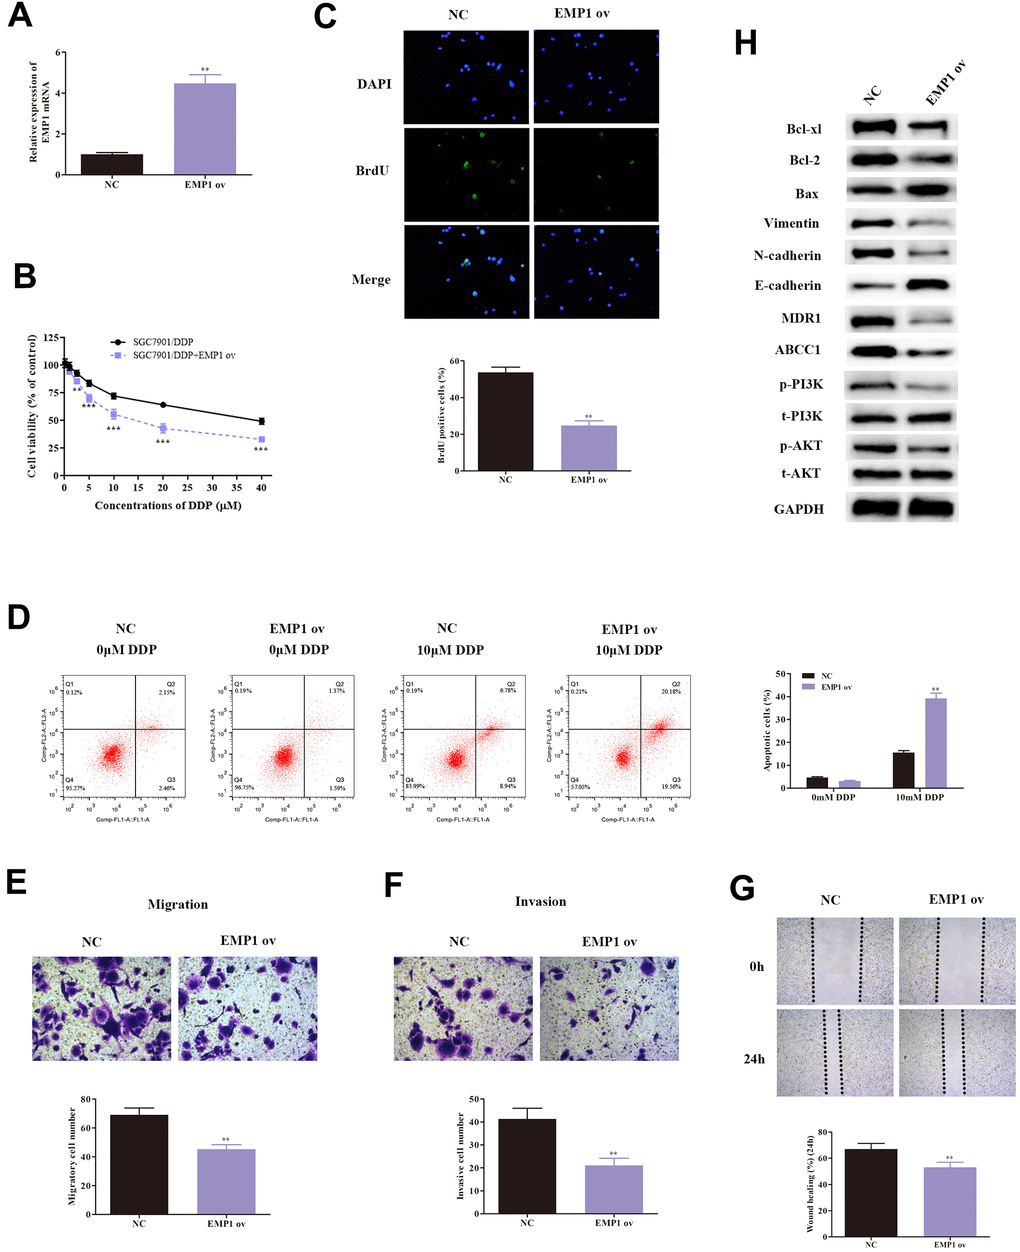 Over-expression of EMP1 leads to decreased cell viability, weakened invasion and migration ability, and enhanced cellular apoptosis. (A) Transfection of EMP1 ov vectors increased expression of EMP1. (B) MTT assay demonstrated that overexpressed EMP1 induced weakened cell survival rate of DDP-resistant SGC7901 cells. (C) Result of the BrdU assay indicated that overexpressed EMP1 lowered cellular viability of DDP-resistant SGC7901. (D) Cellular apoptosis rate of DDP-resistant SGC7901 cells with different treatments. (E, F) Results from transwell assay demonstrated lower cell invasion and metastasis of DDP-resistant SGC7901 upon up-regulation of EMP1. (G) Wound healing assay indicated up-regulation of EMP1 leads to decreased invasive ability in DDP-resistant SGC7901. (H) Western blot assay helped examine the down-stream regulatory proteins of EMP1. ***p